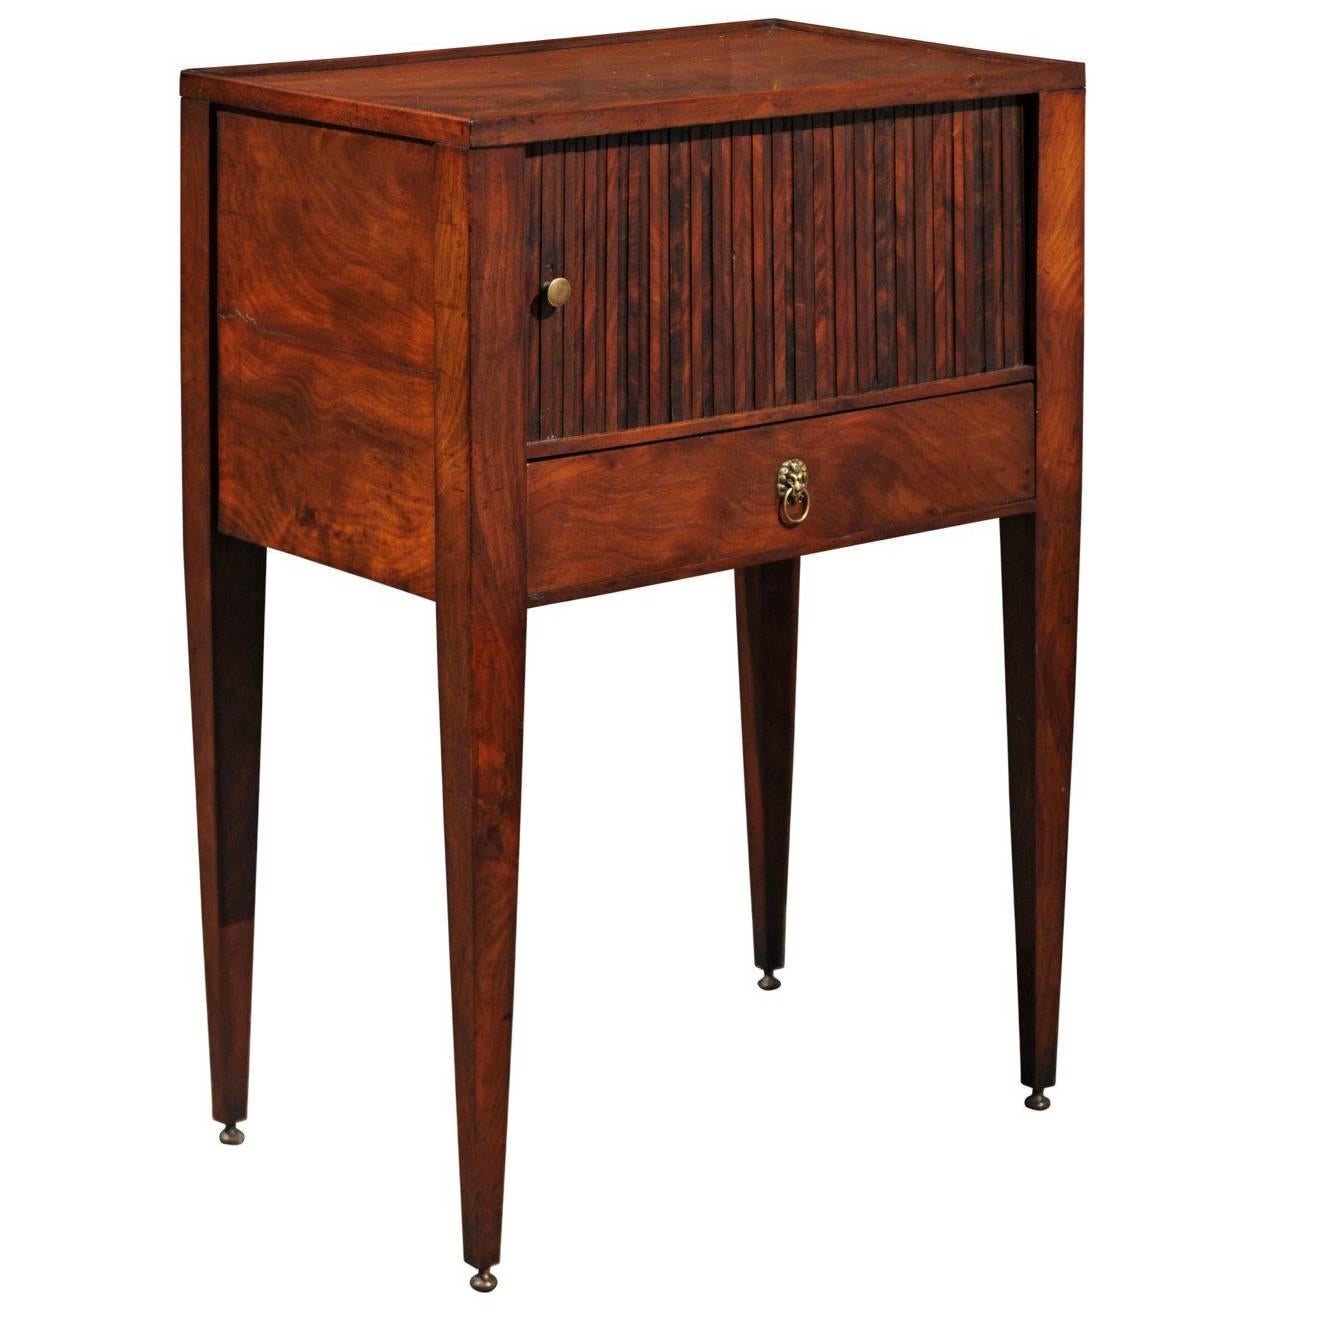 English 1880 Wooden Side Table with Tambour Door, Single Drawer and Tapered Legs